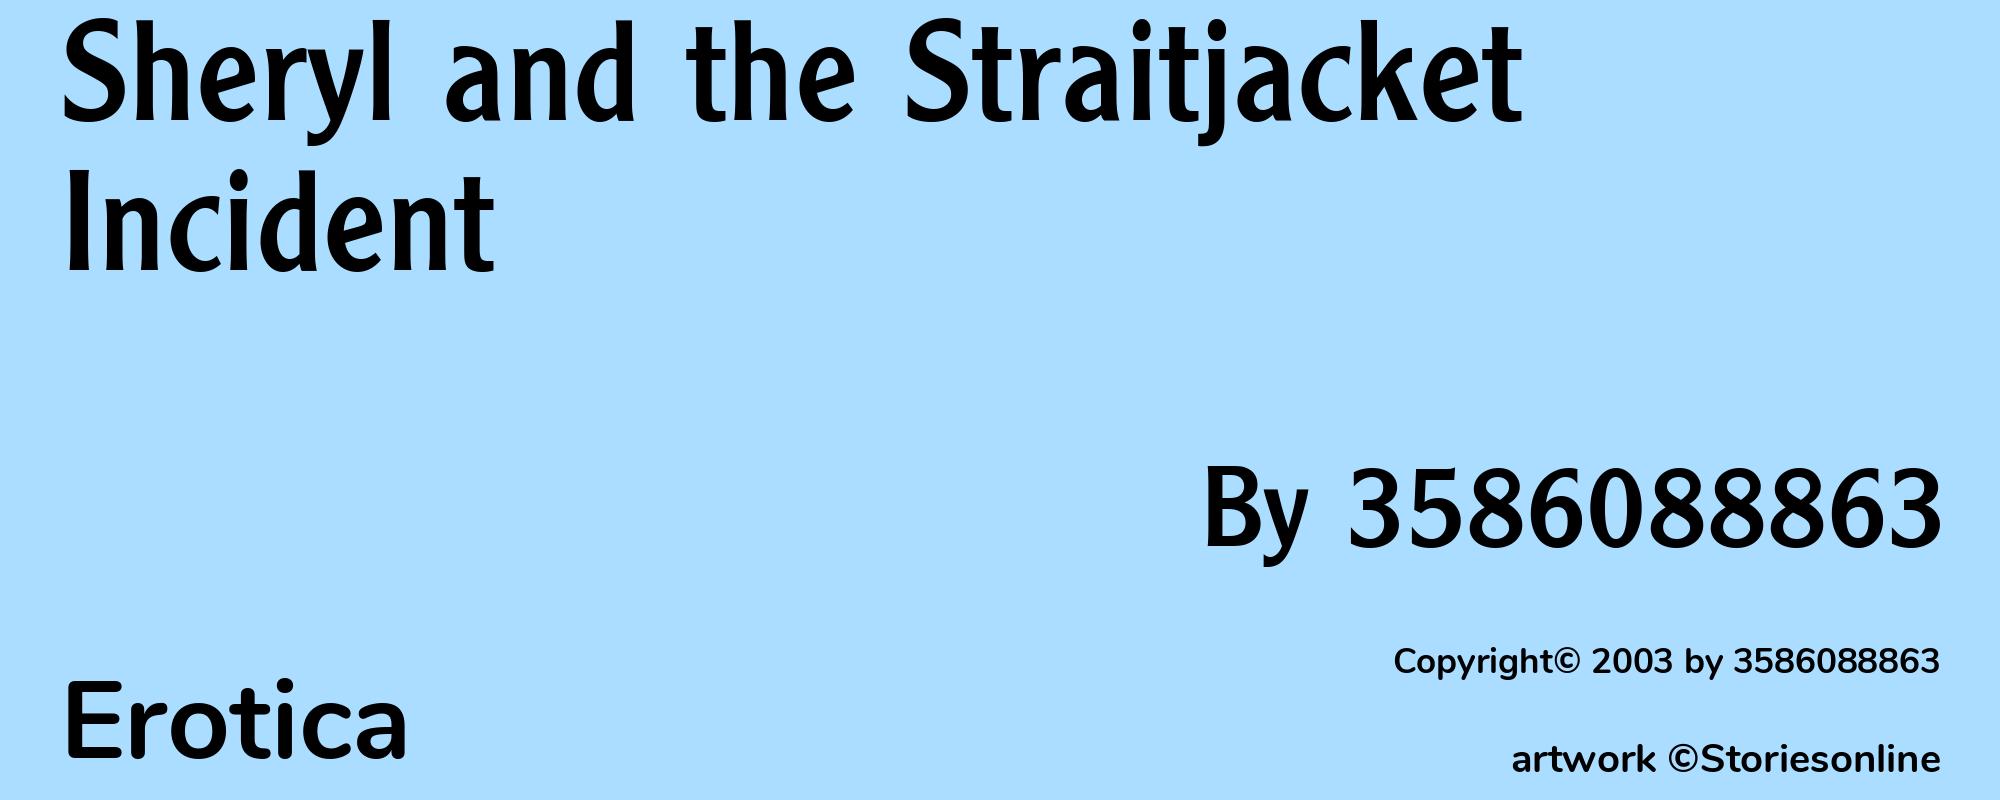 Sheryl and the Straitjacket Incident - Cover